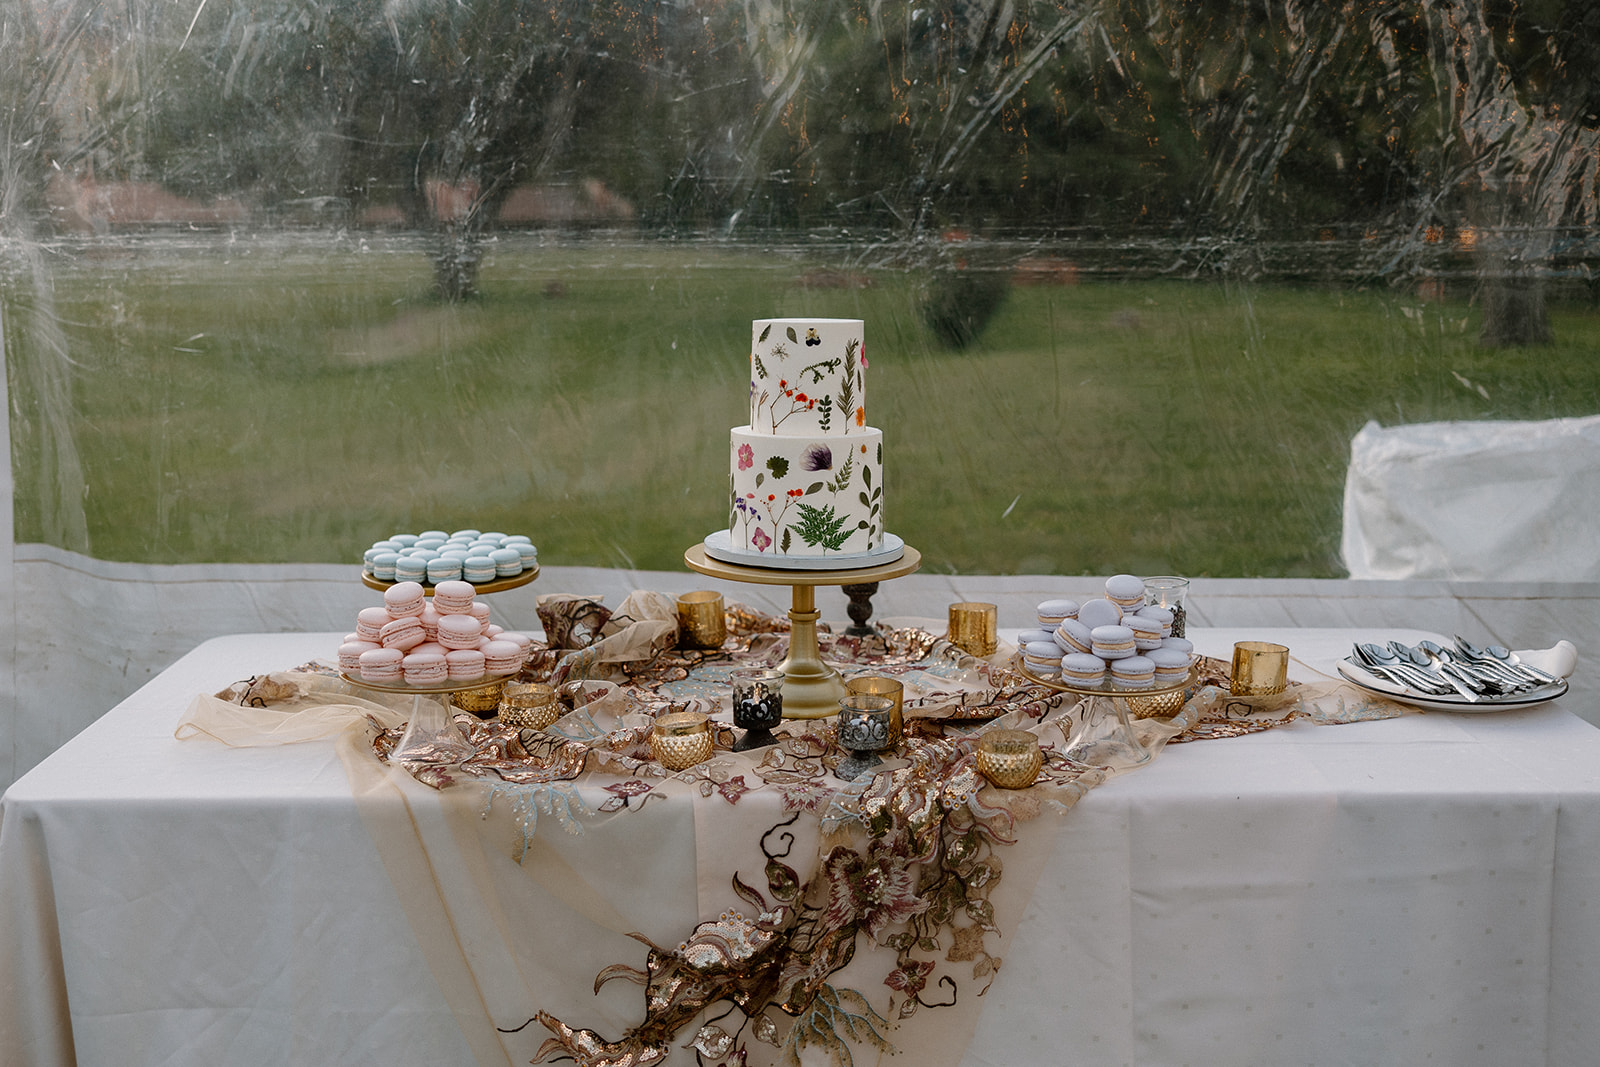 Stunning wedding details set up and ready for the fairy garden wedding reception